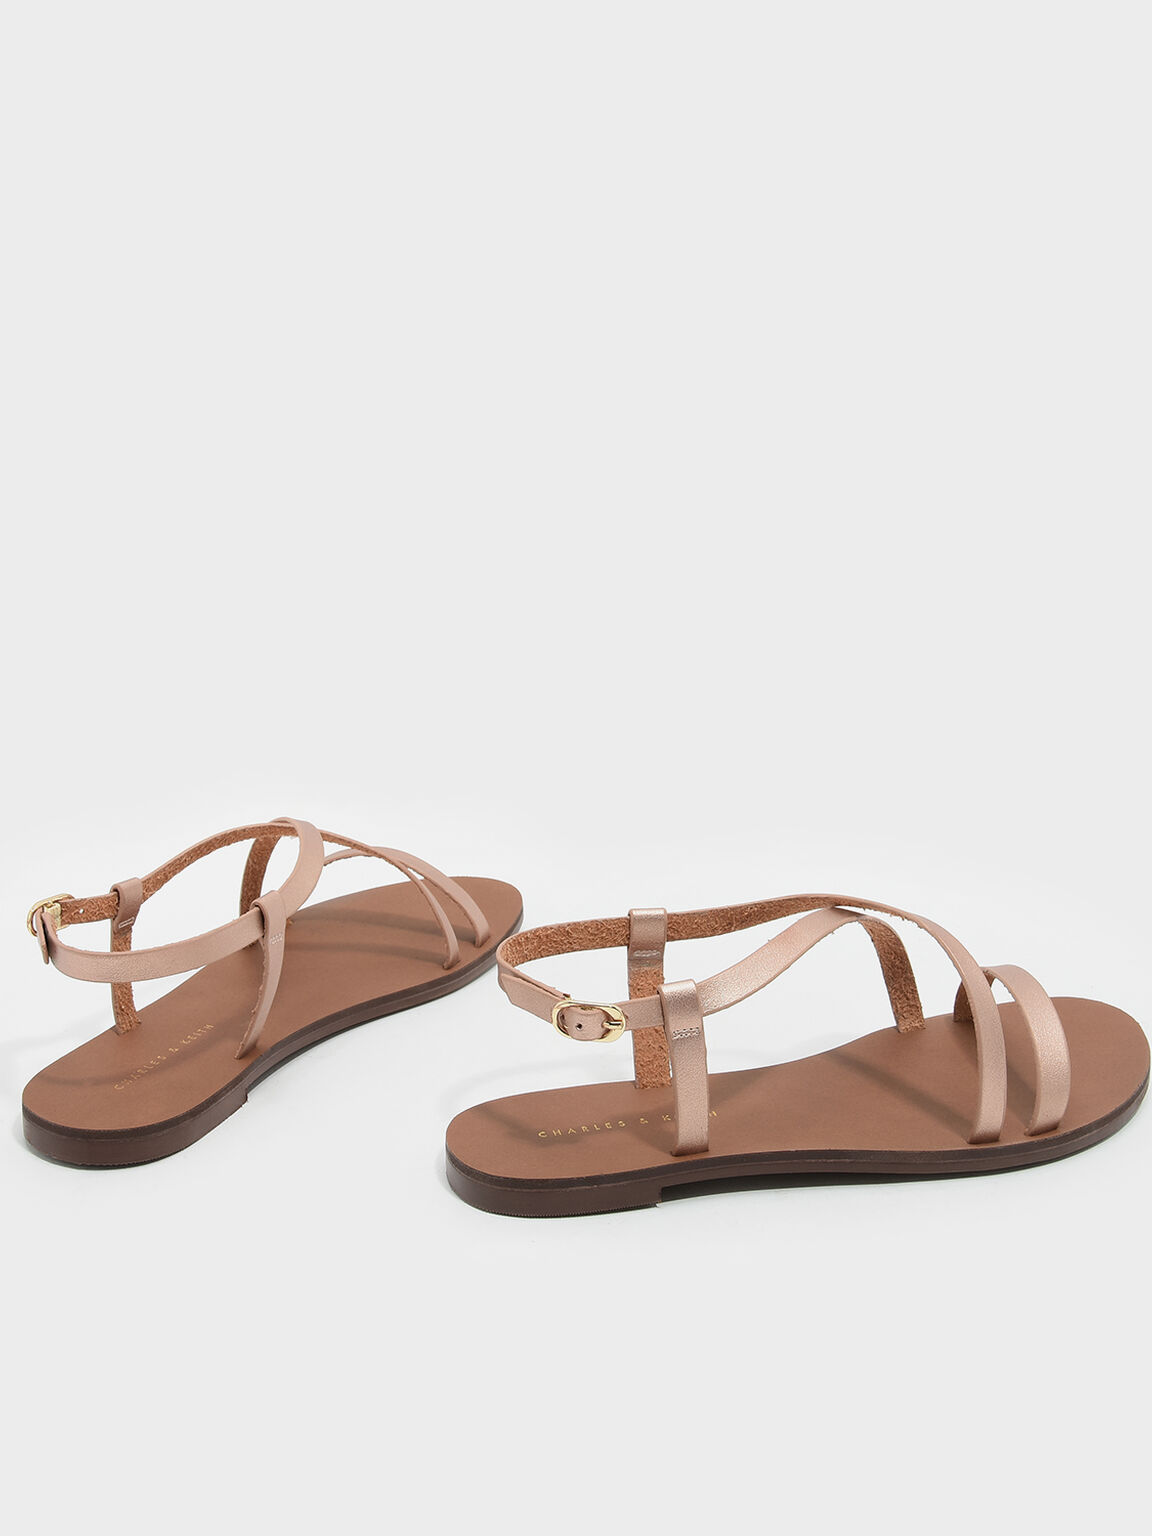 Rose Gold Criss Cross Sandals - CHARLES & KEITH US